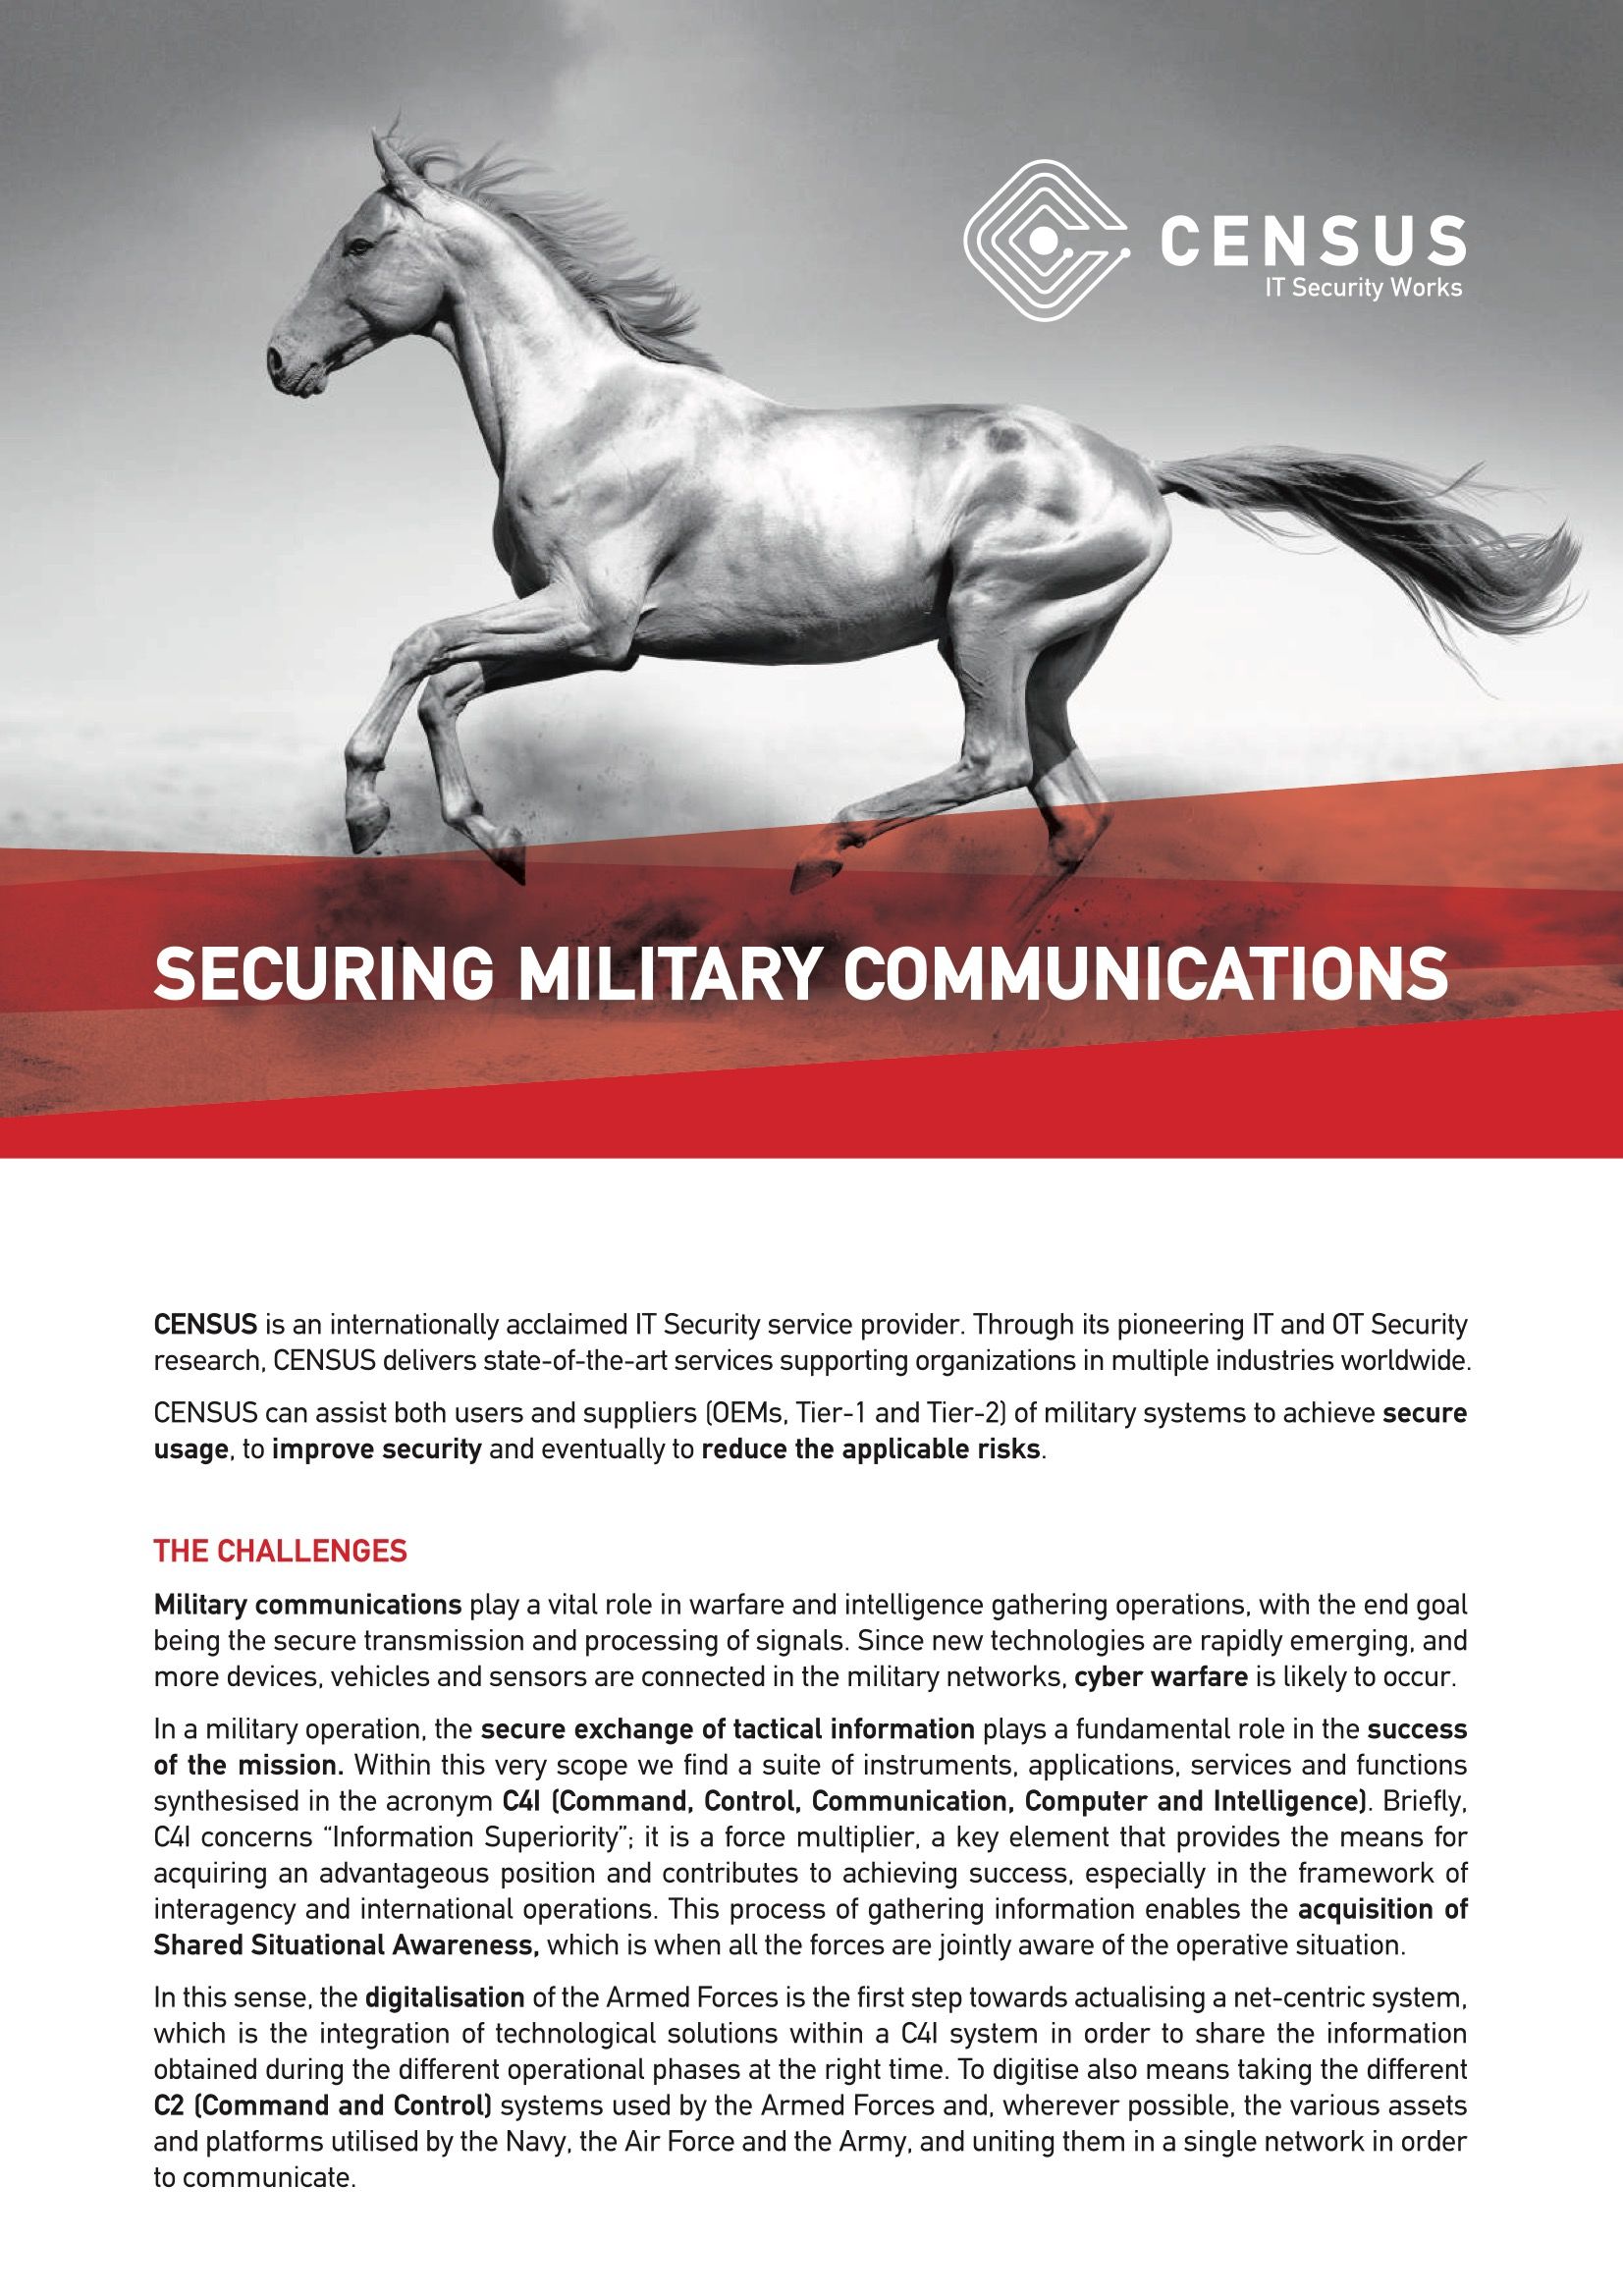 Securing Military Communications